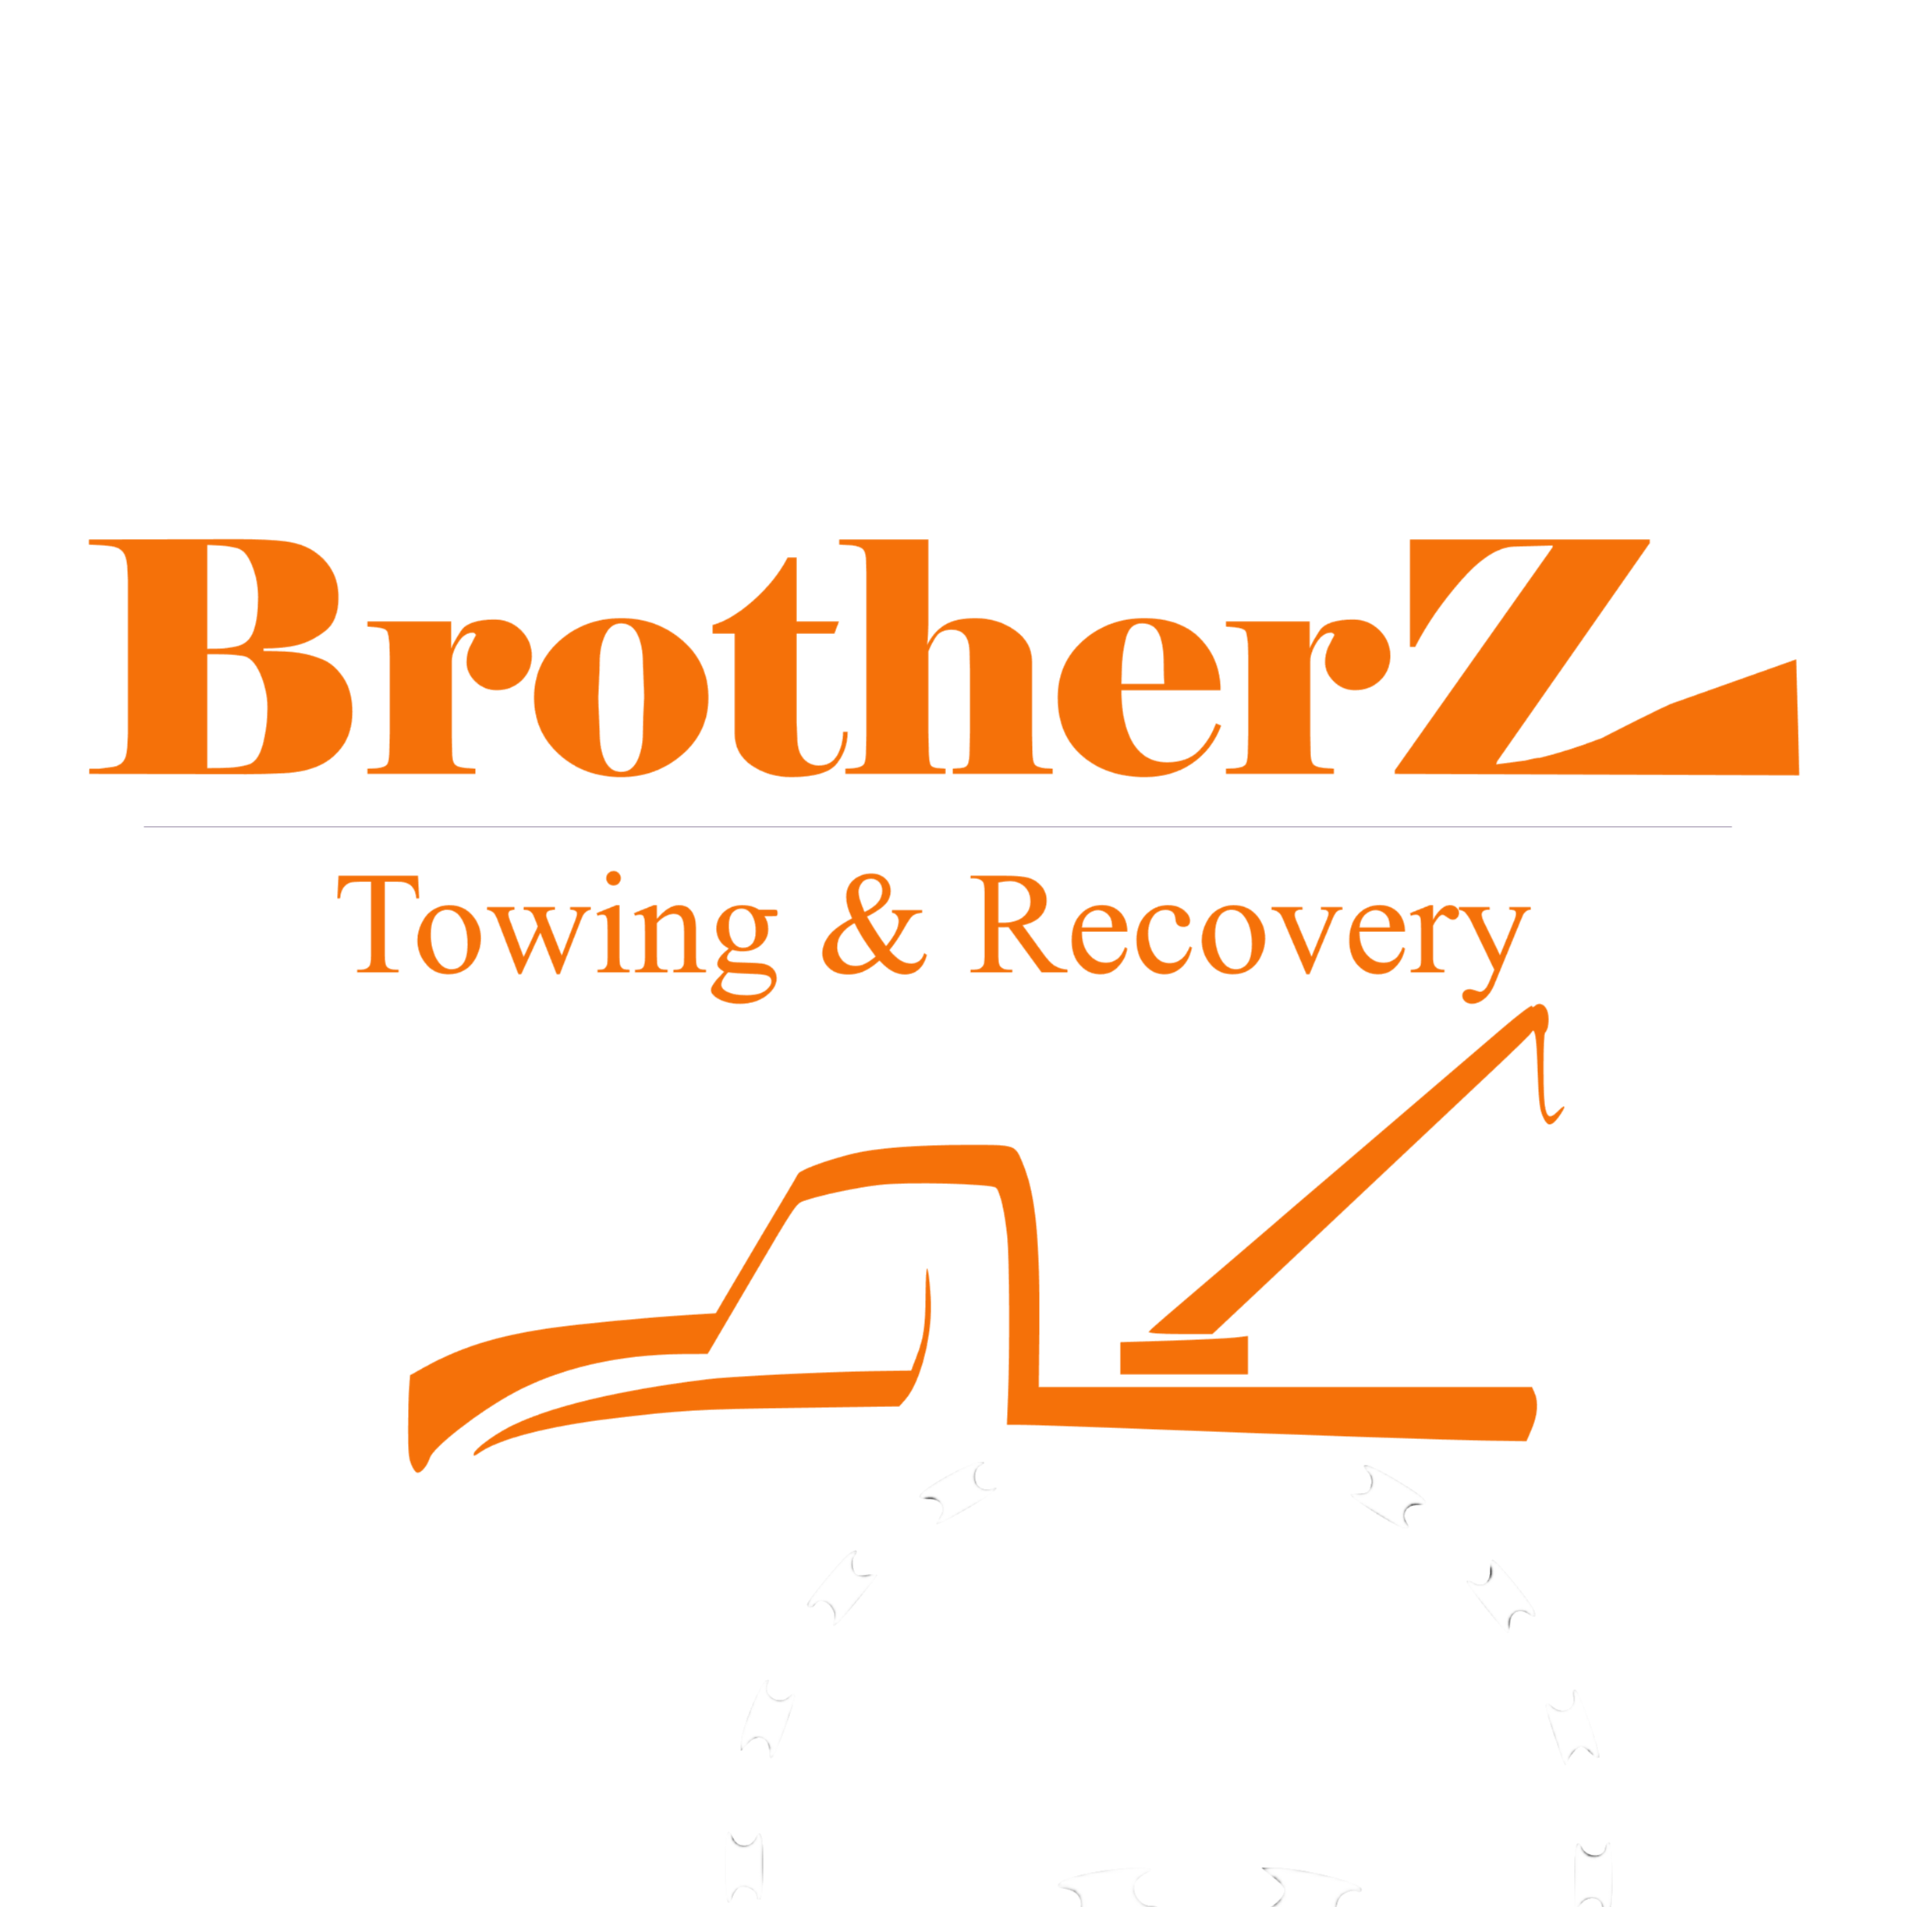 Brotherz Towing and Recovery  logo